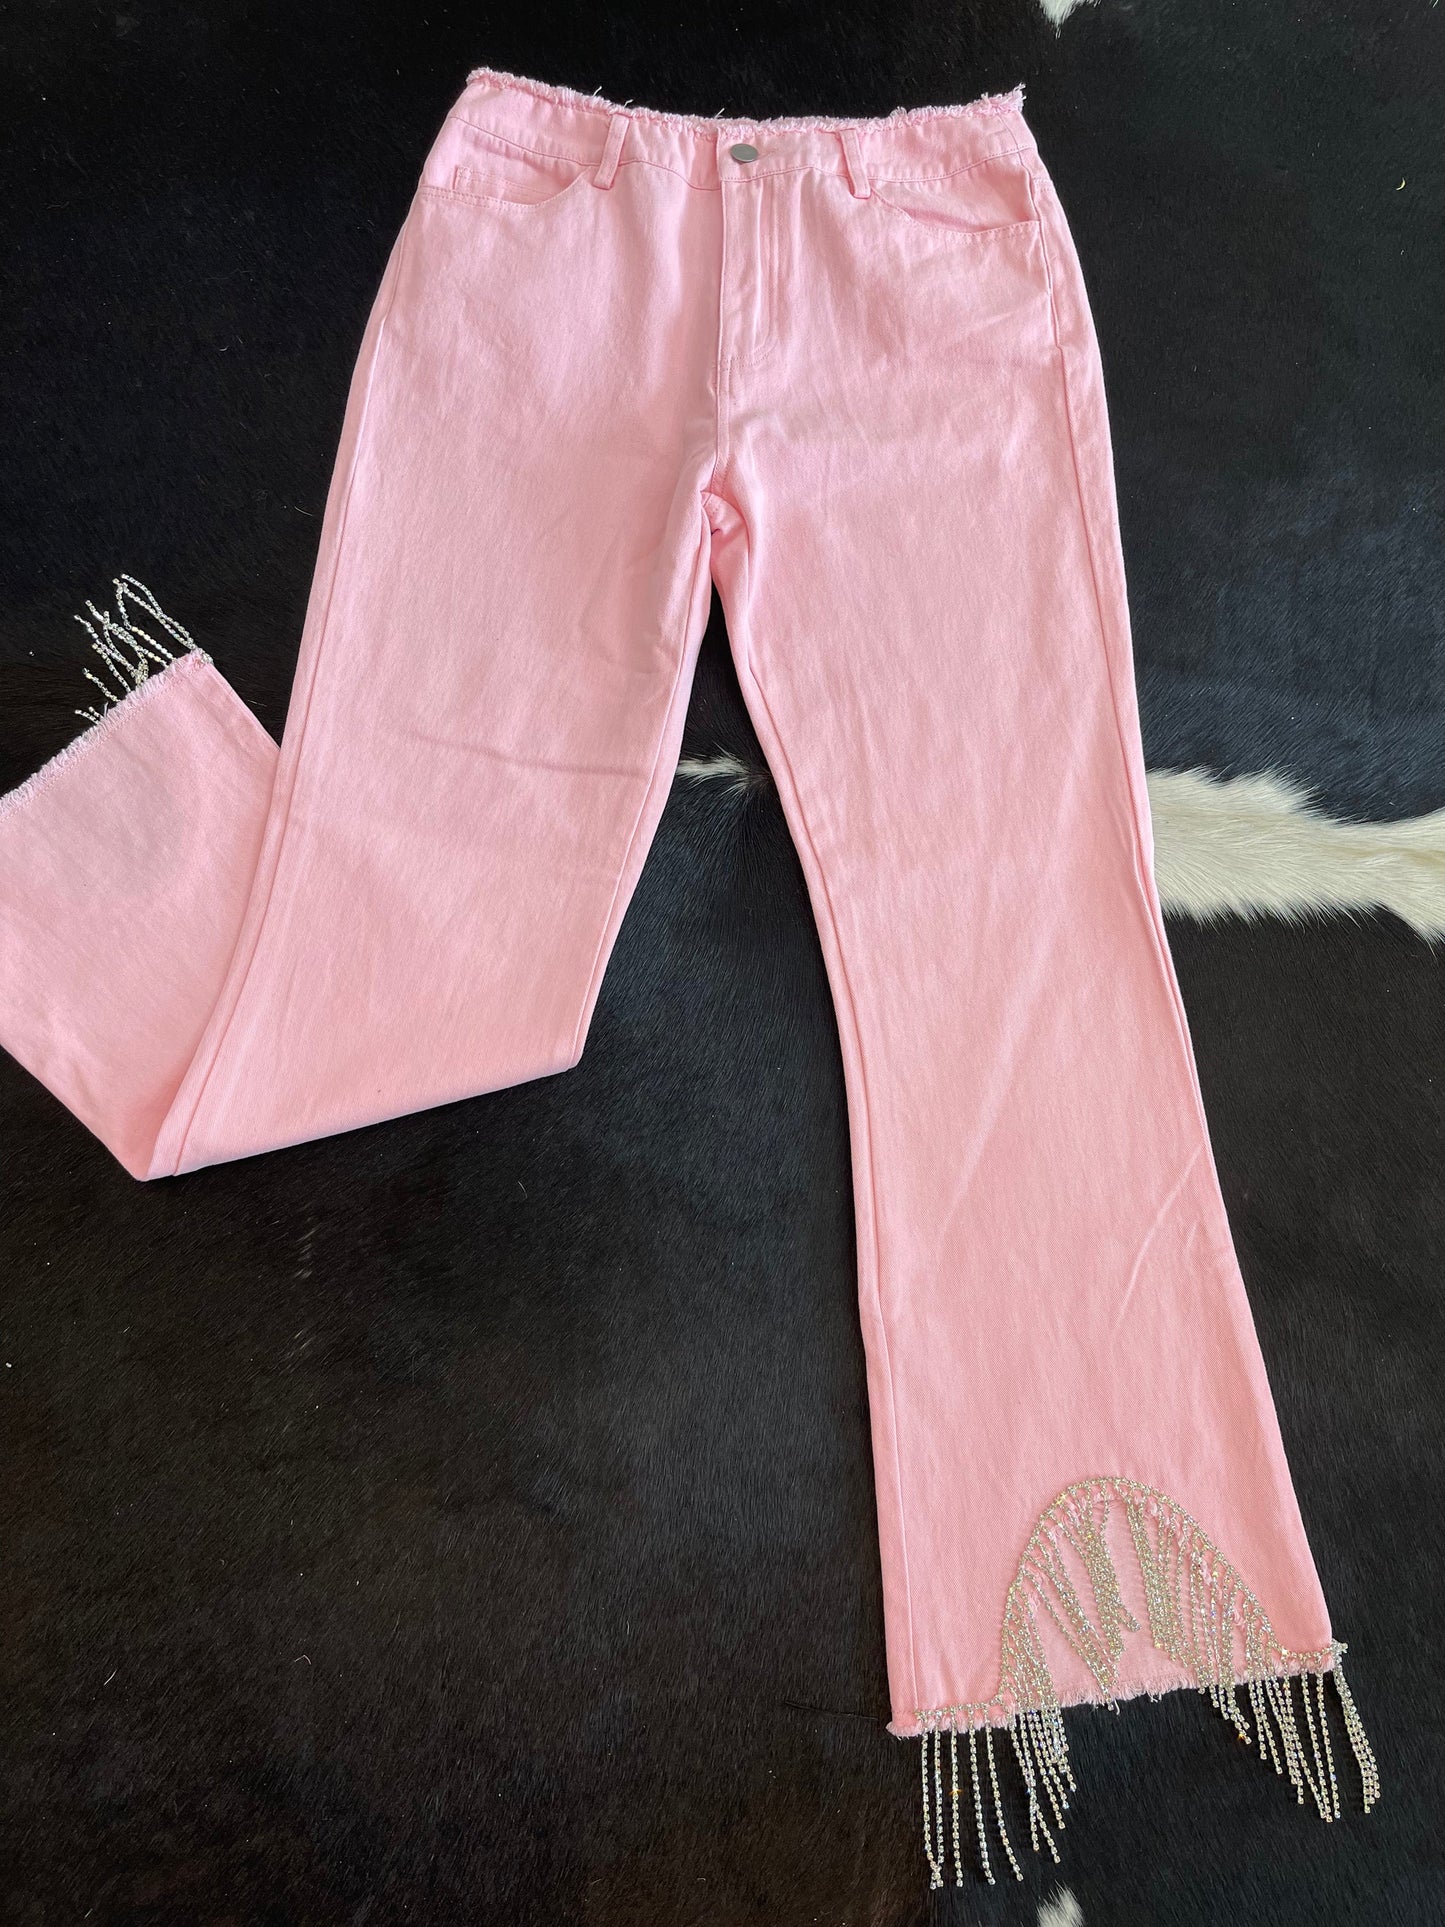 Rhinestone Cowgirl Jeans, Baby Pink